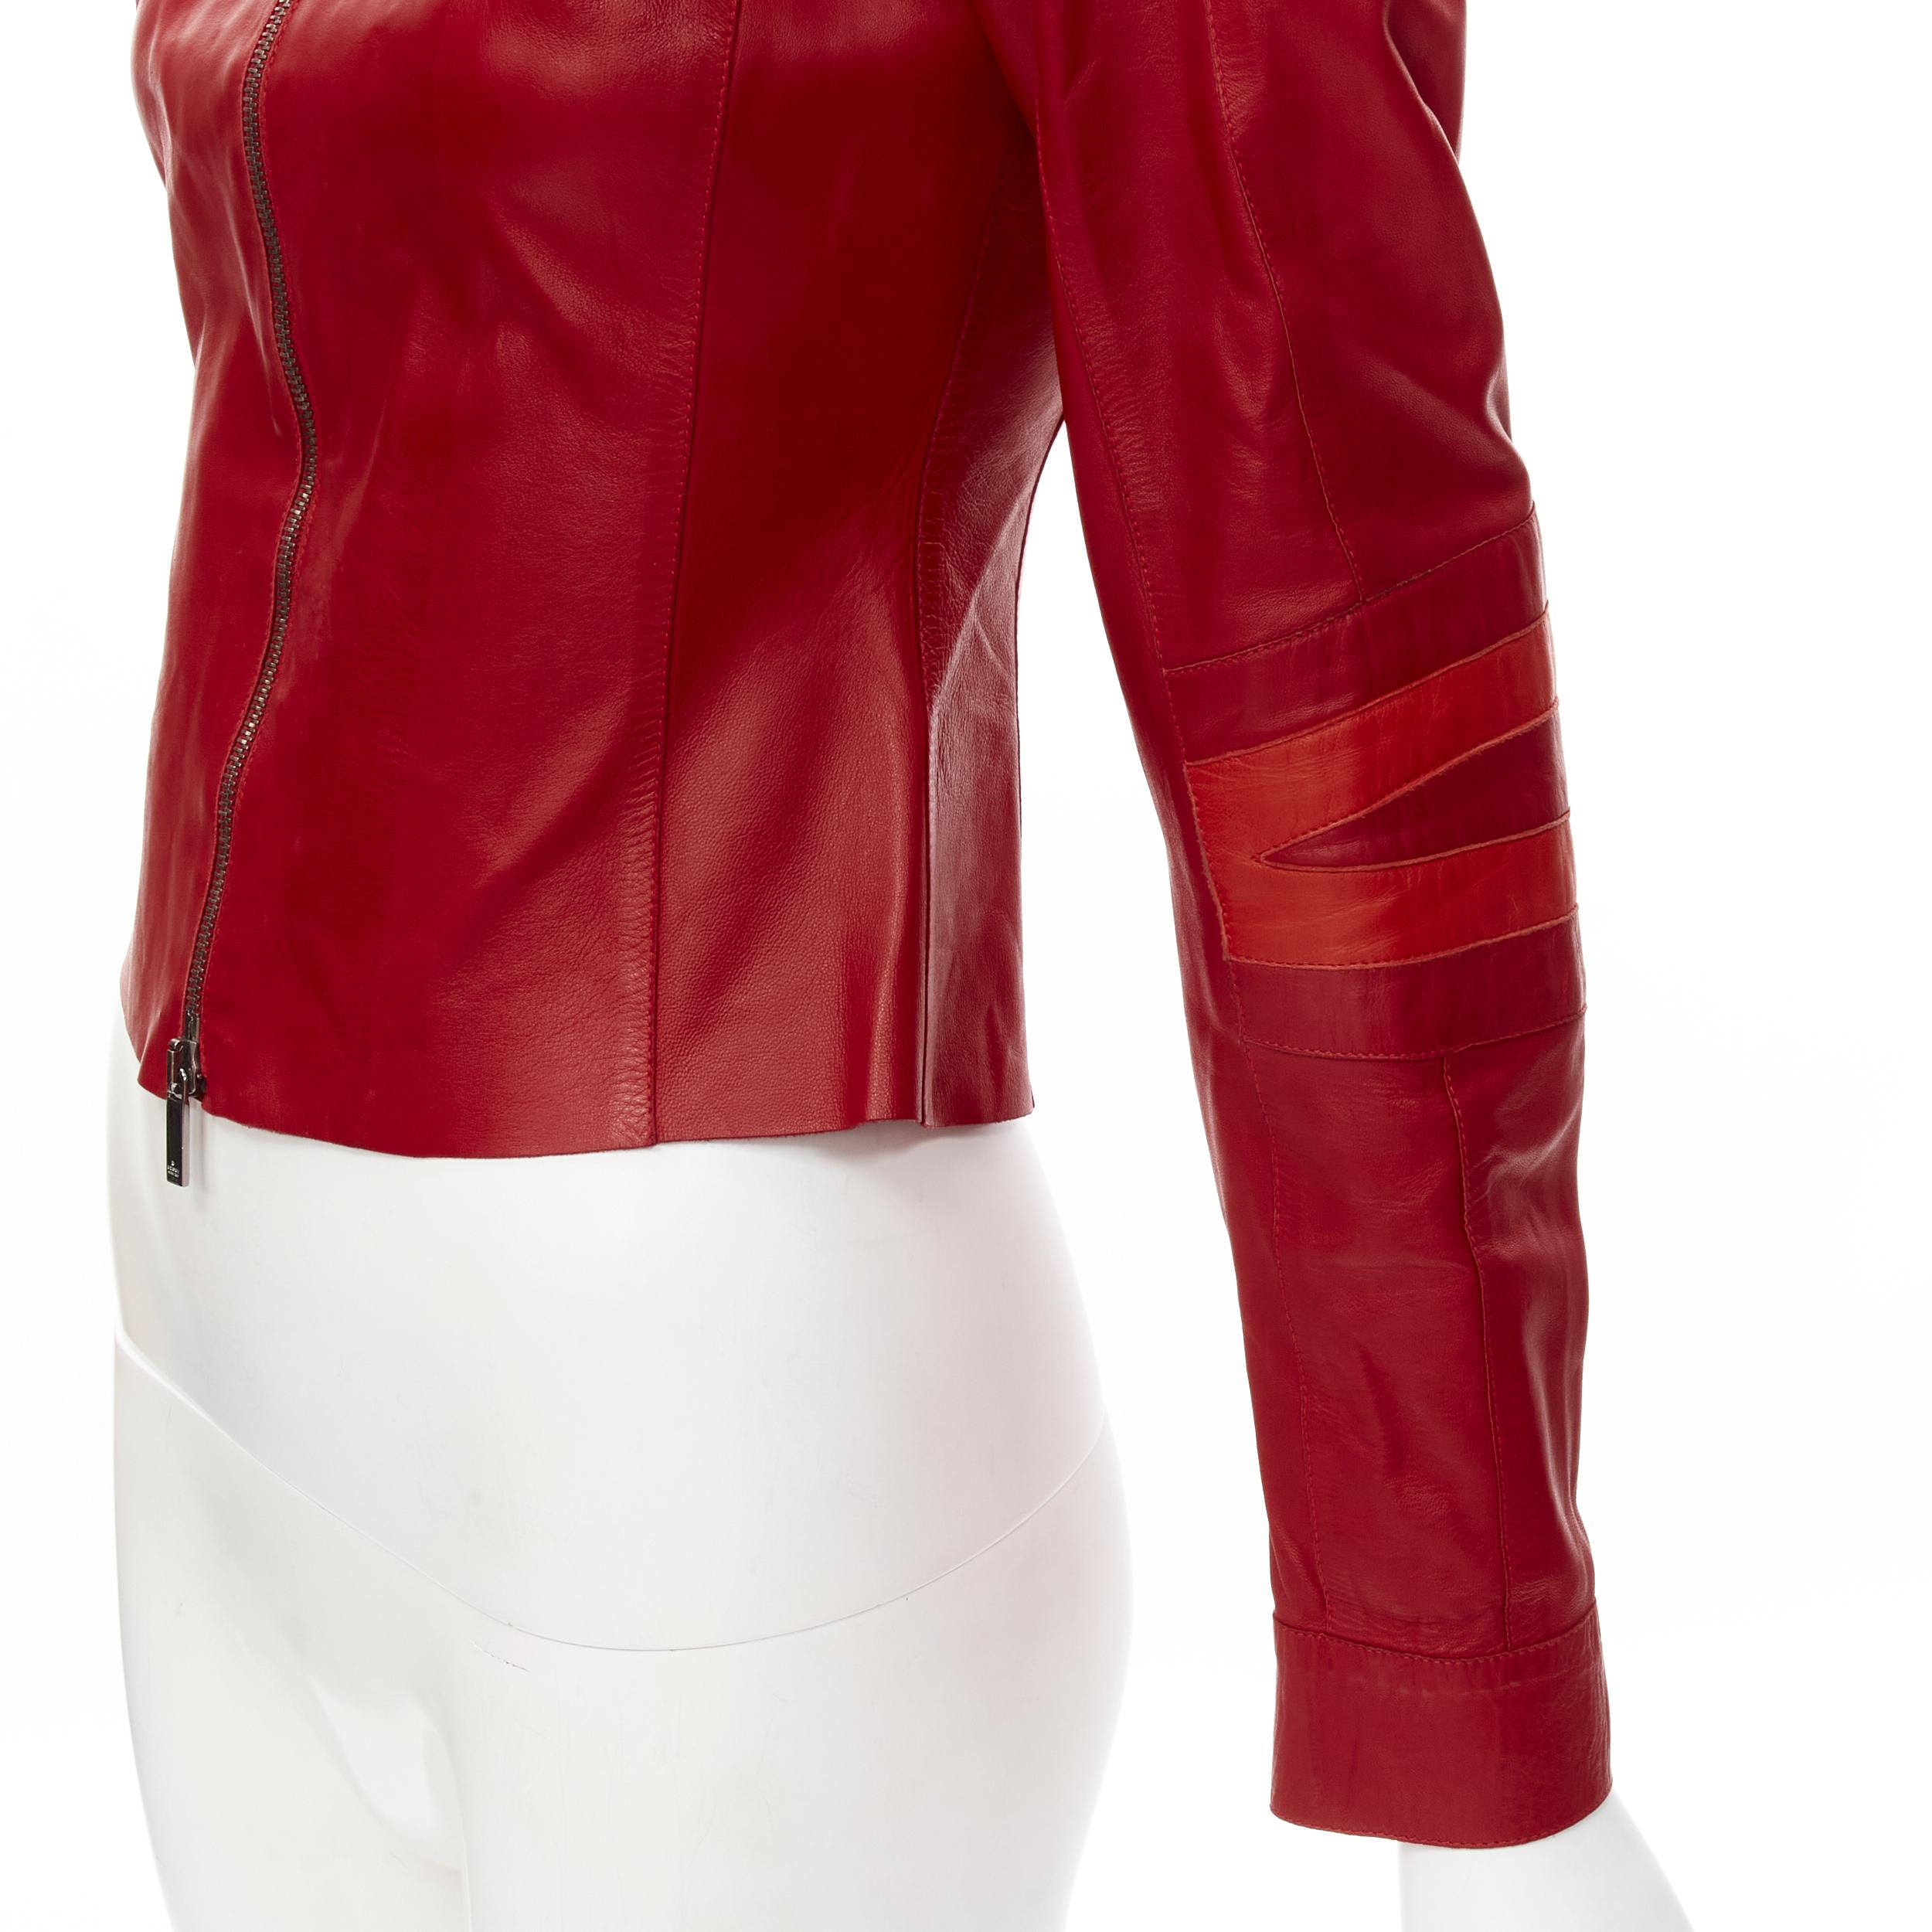 GUCCI TOM FORD Vintage Y2K red minimalist moto sleeves leather jacket IT38 XS
Brand: Gucci
Extra Detail: Red leather upper. Gunmetal zipper pulls. Moto inspired elbow patch detailing on sleeves.

CONDITION:
Condition: Very good, this item was